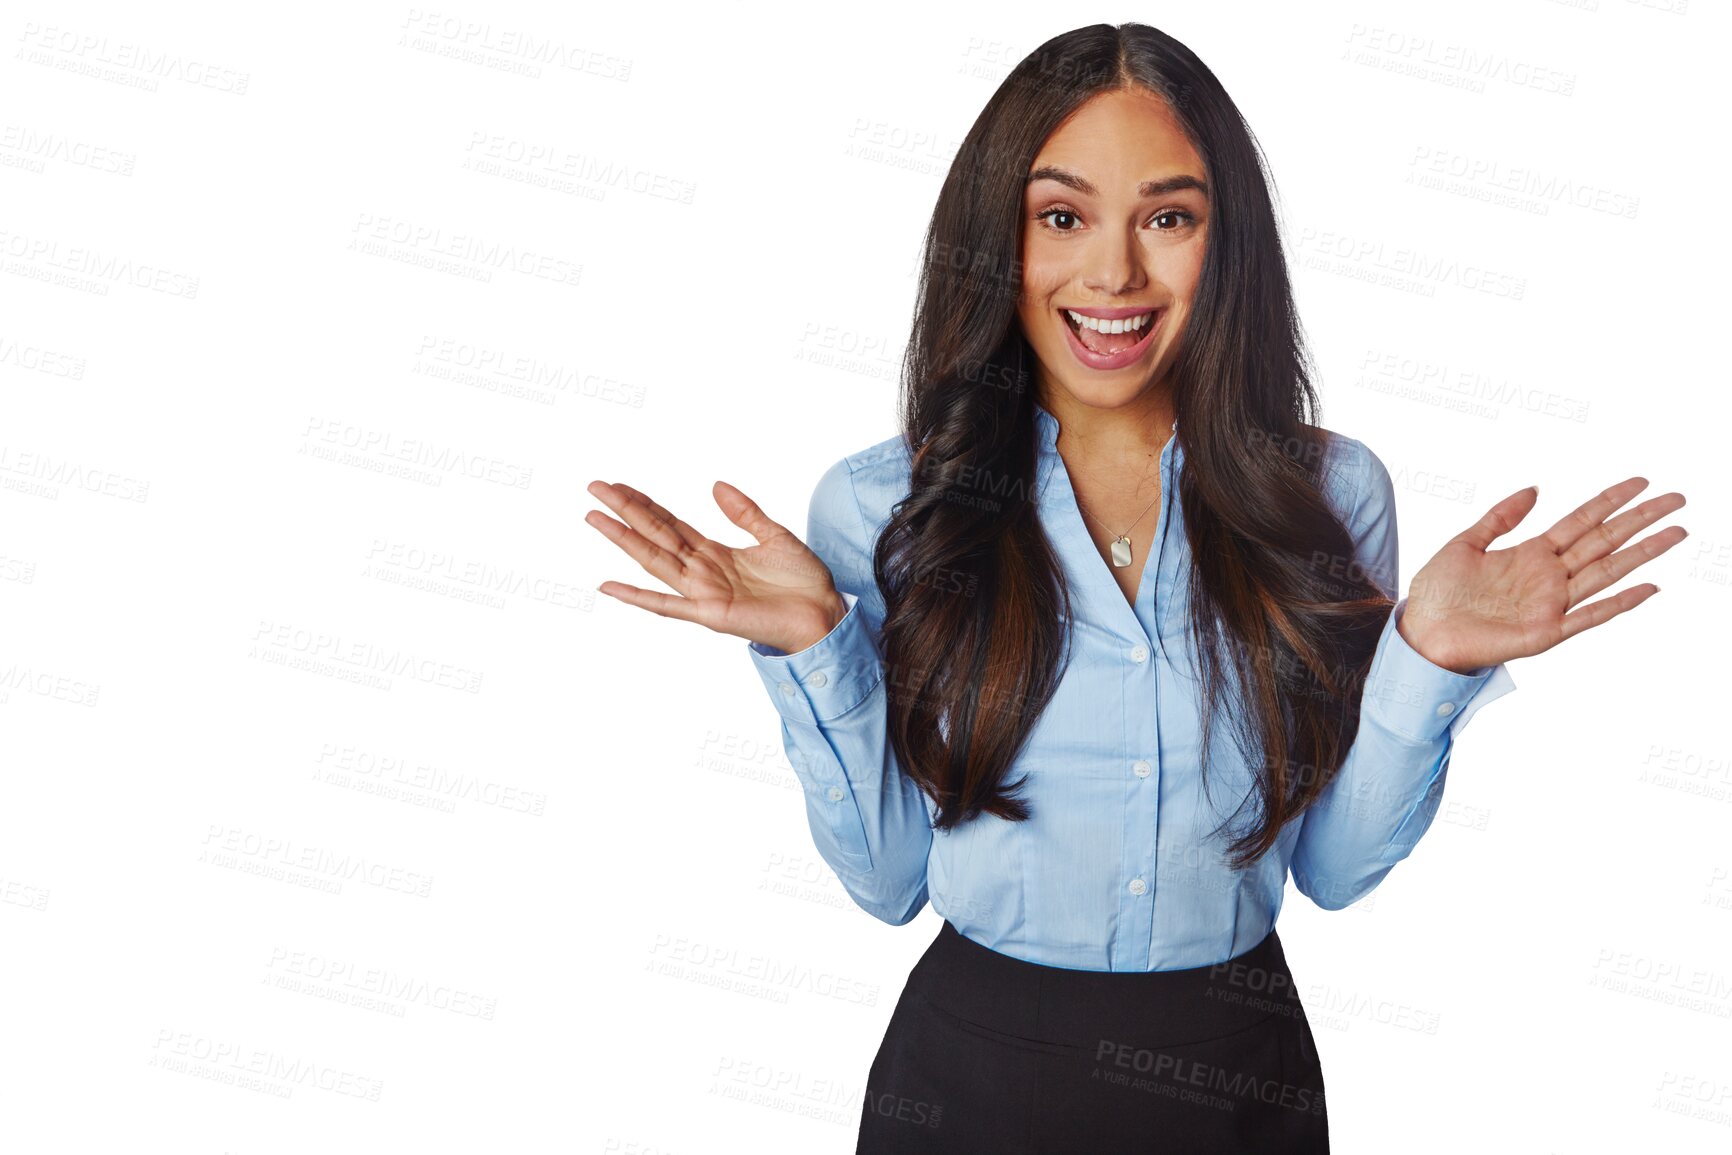 Buy stock photo Excited, business and portrait of woman with a smile, corporate news or announcement. Happiness, confidence and professional female with hands for surprise isolated on a transparent, png background
